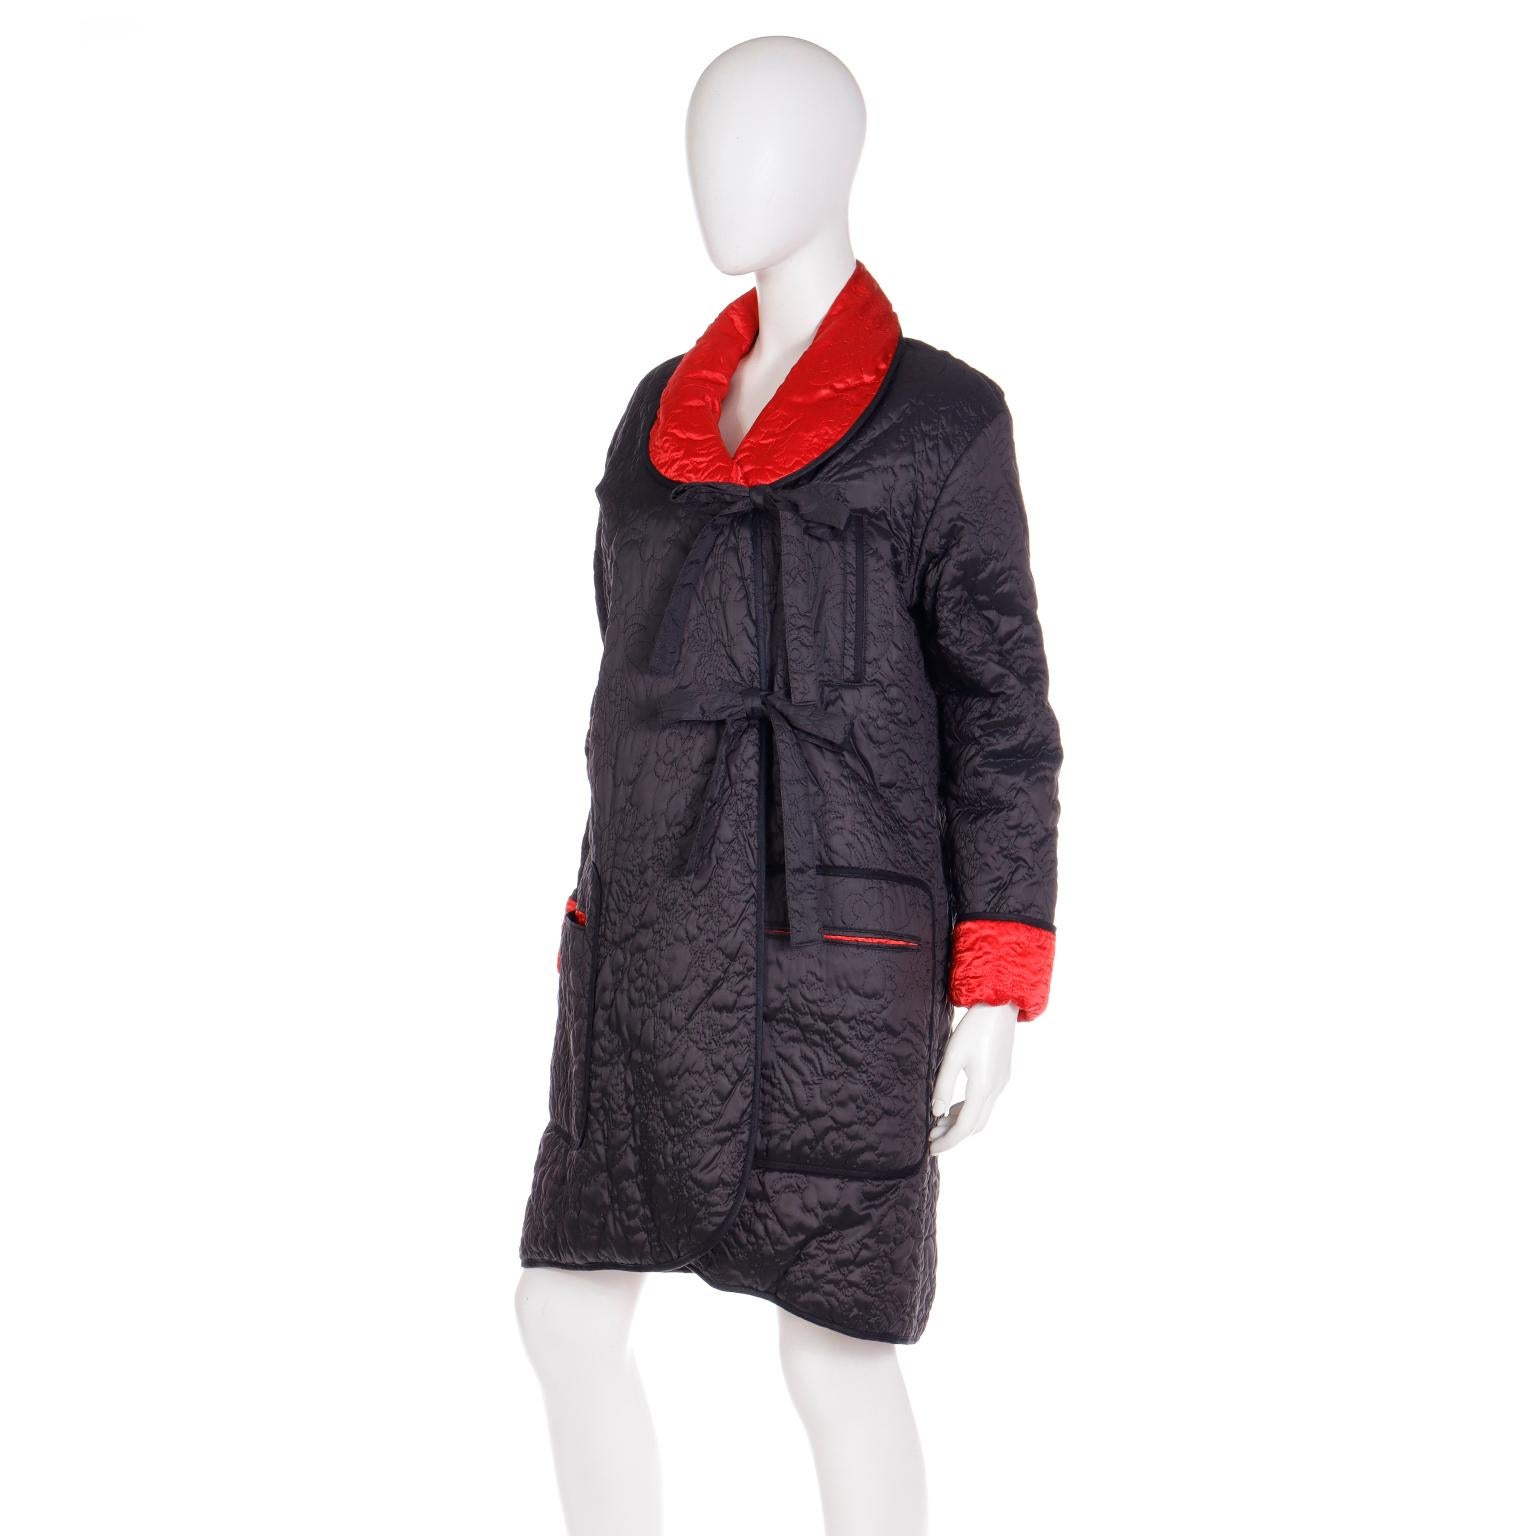 Vintage Sonia Rykiel Quilted Red & Black Reversible Jacket With Hood In Excellent Condition For Sale In Portland, OR